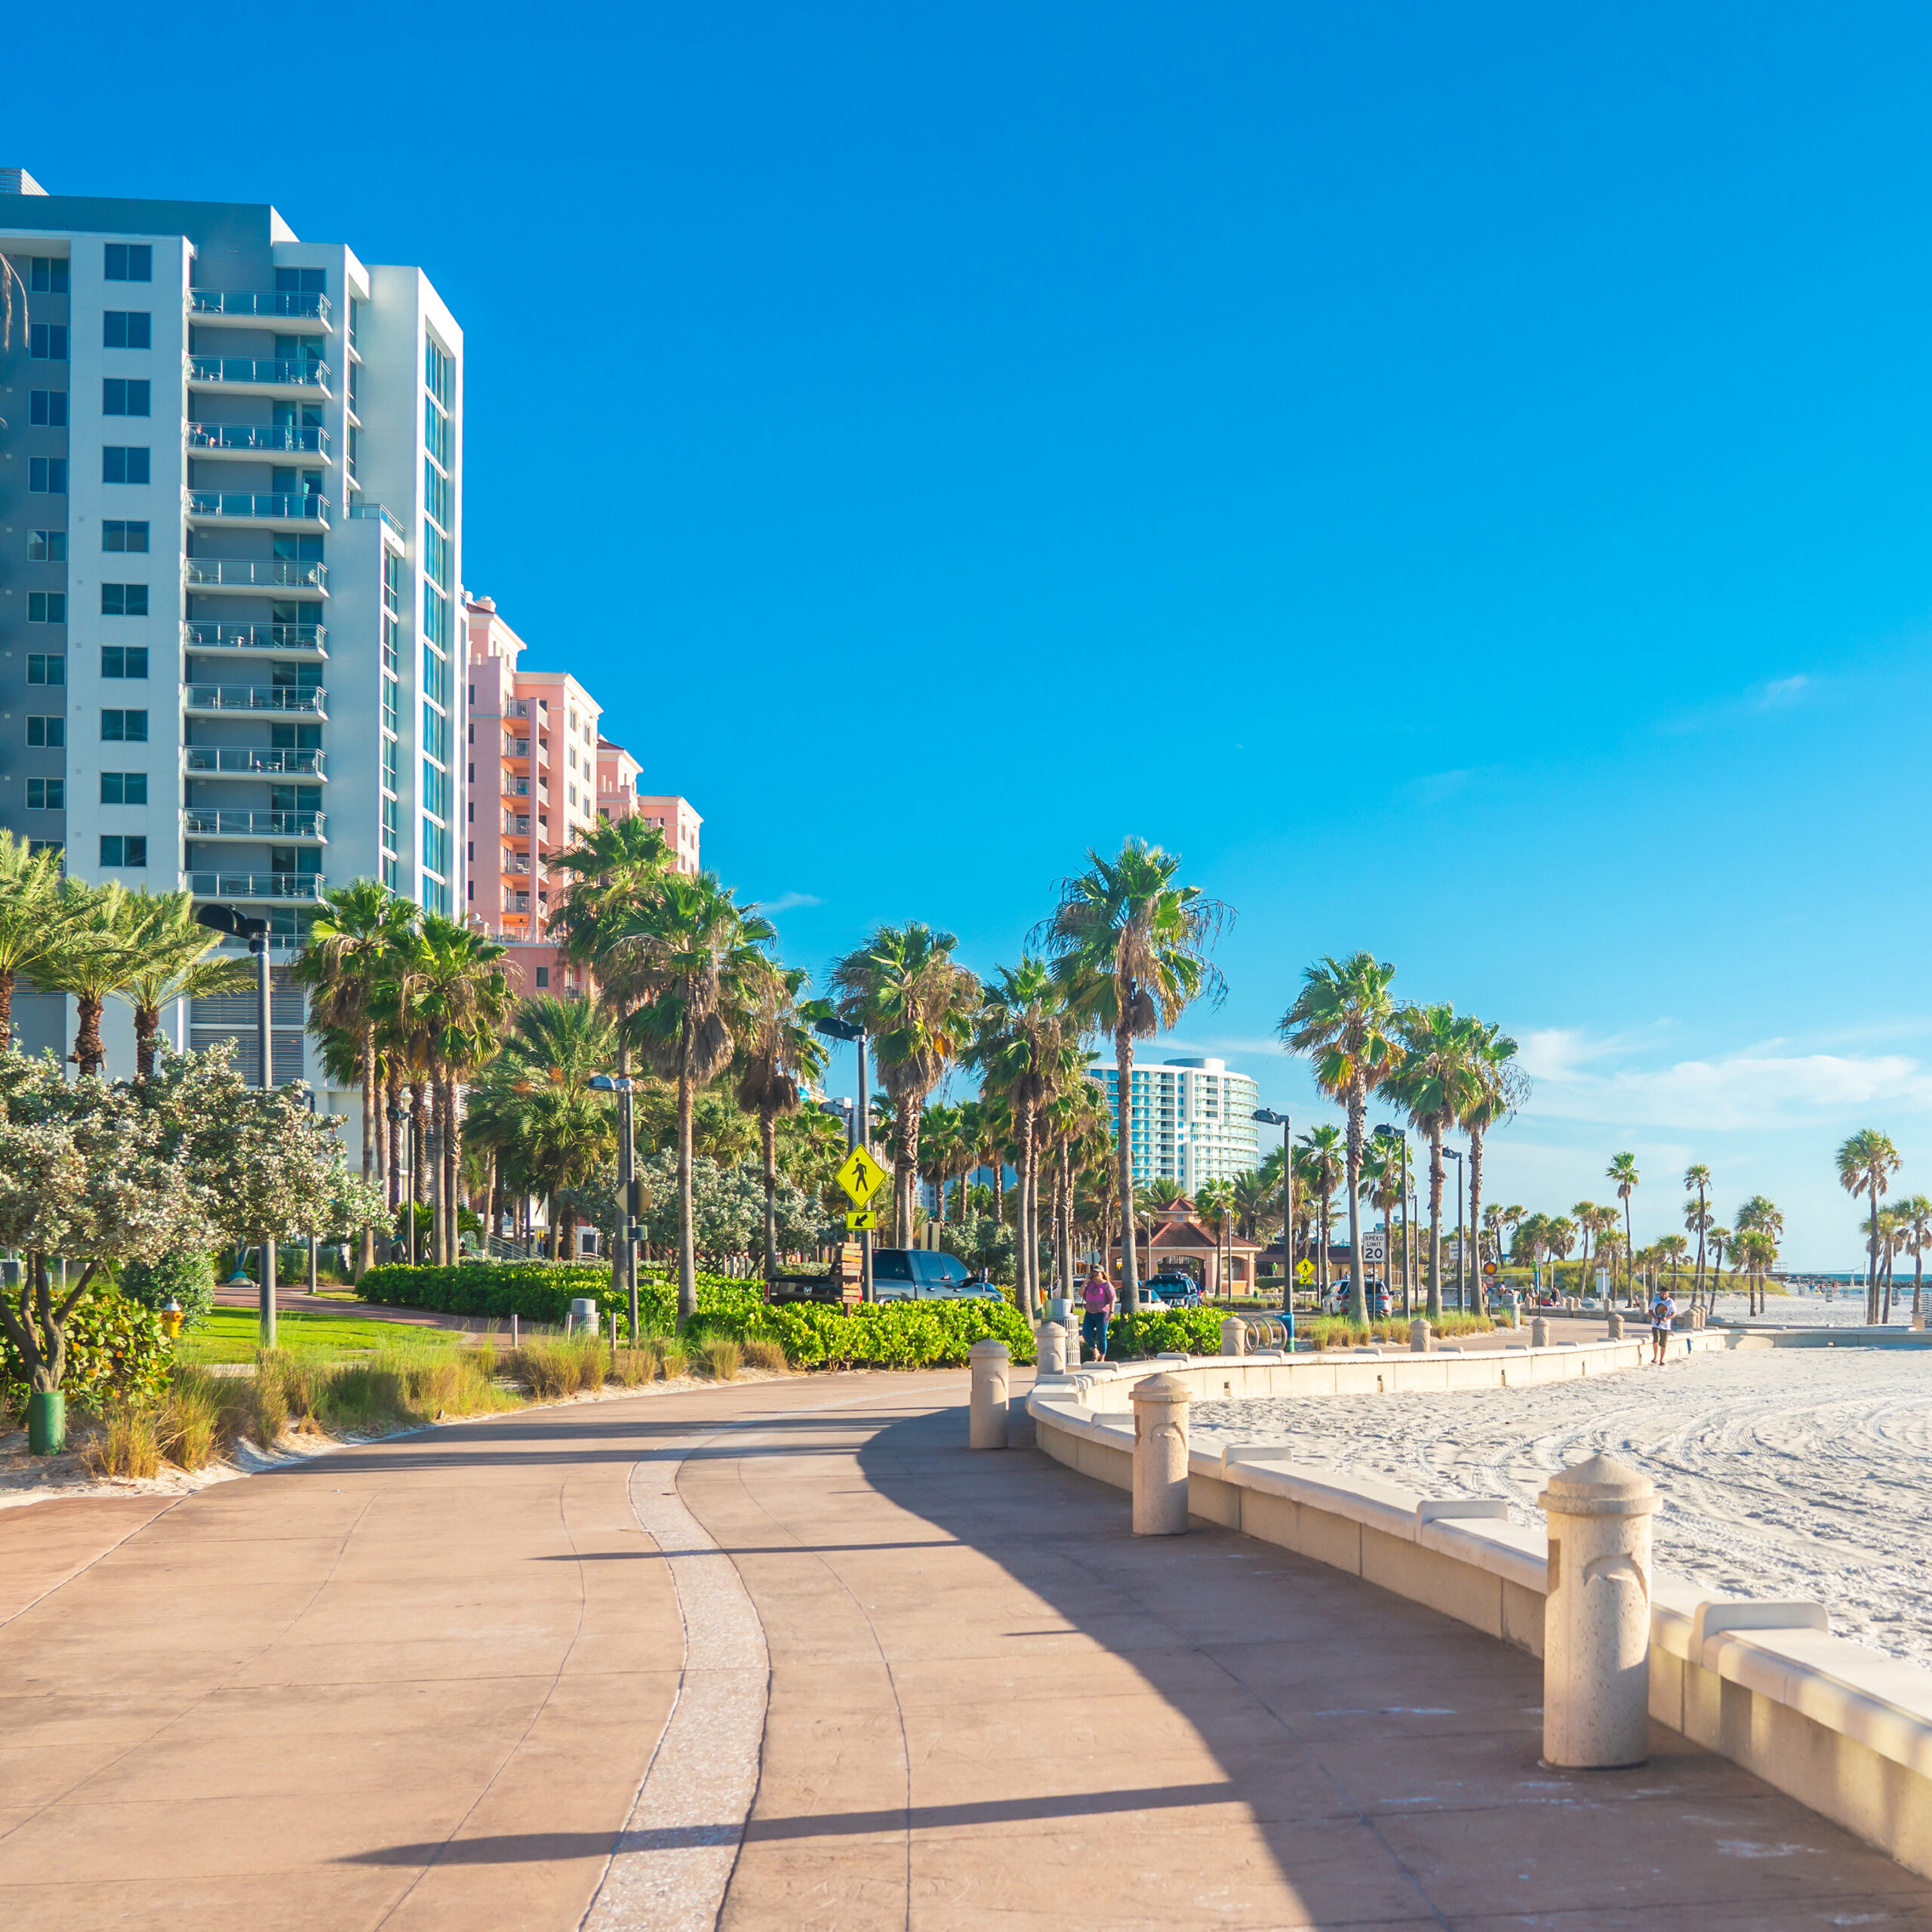 HOT in the Florida real estate market: investment property loans, non-warrantable condos, and loans for foreign nationals.